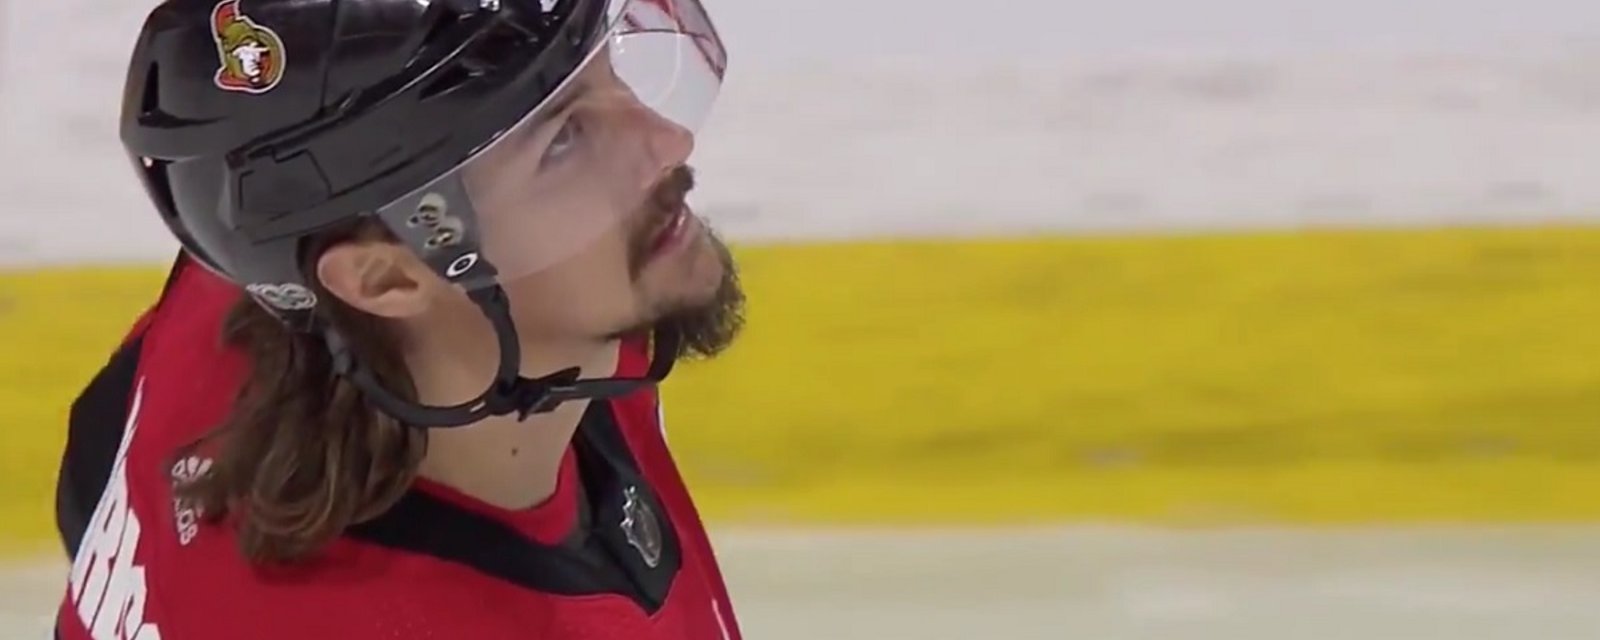 Furious Karlsson drops multiple F-bombs after missing scoring chance.